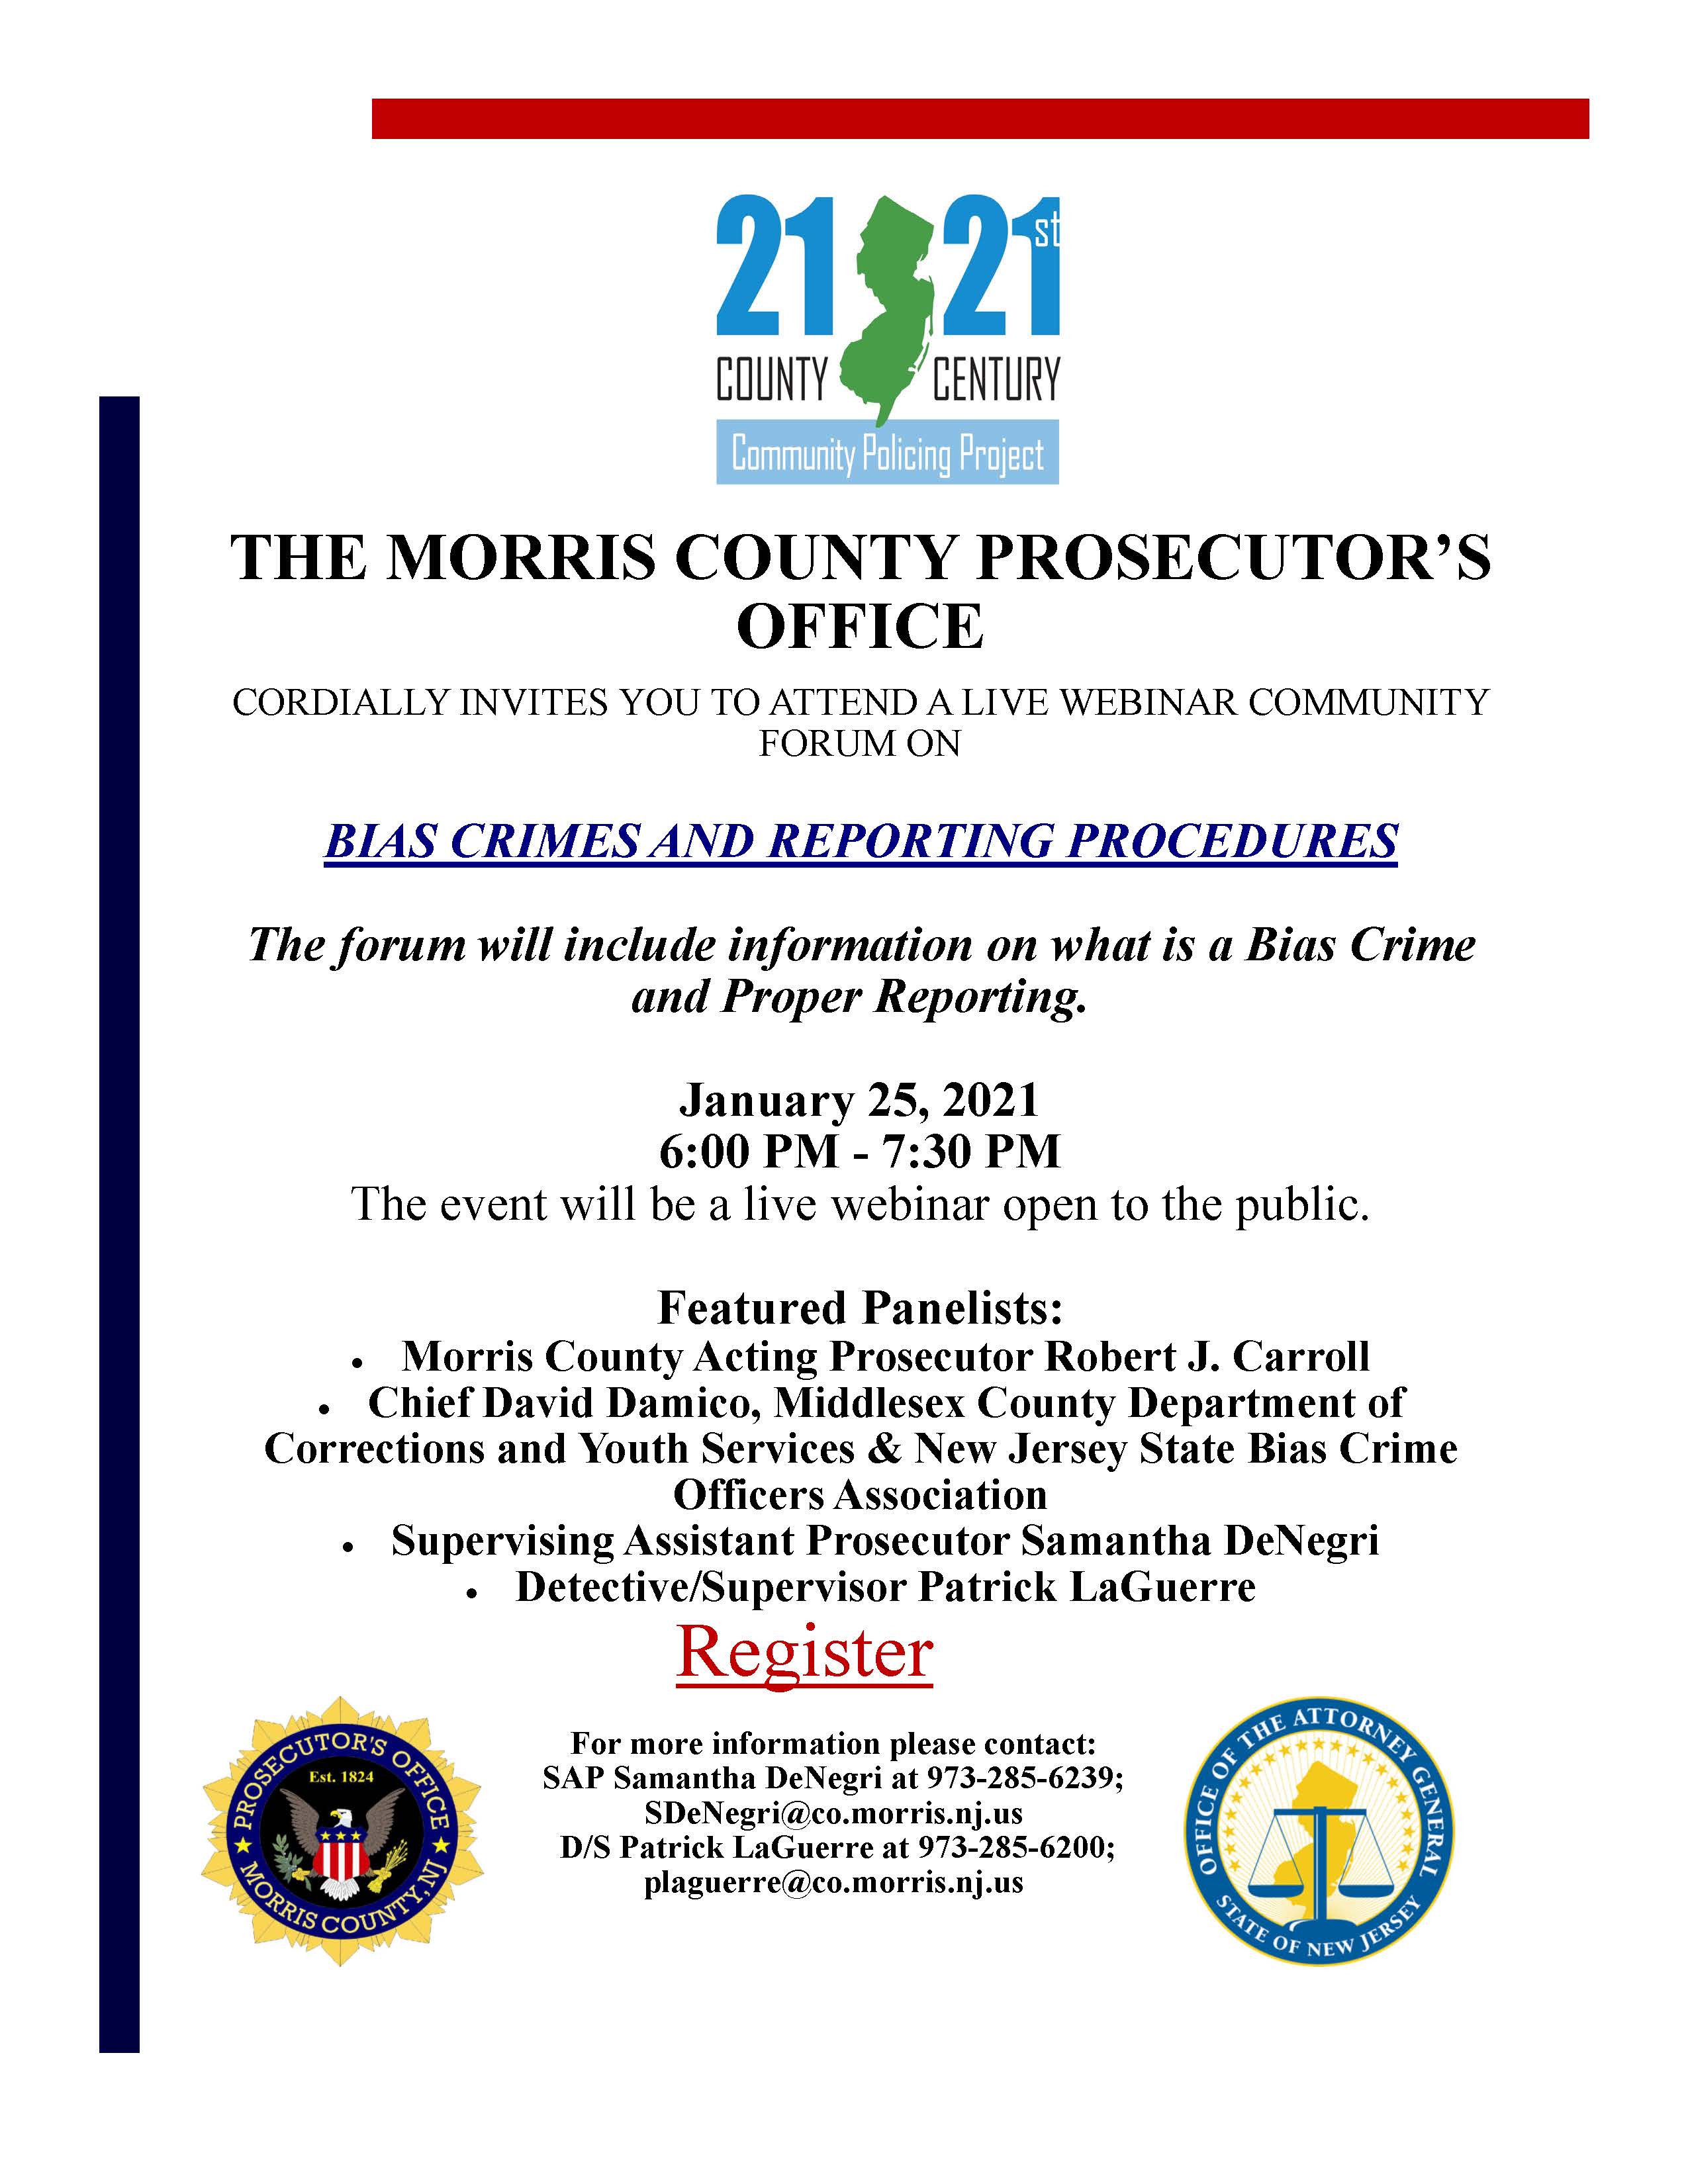 Flyer to notify the public of an upcoming forum on bias crimes scheduled for Jan. 25, 2021